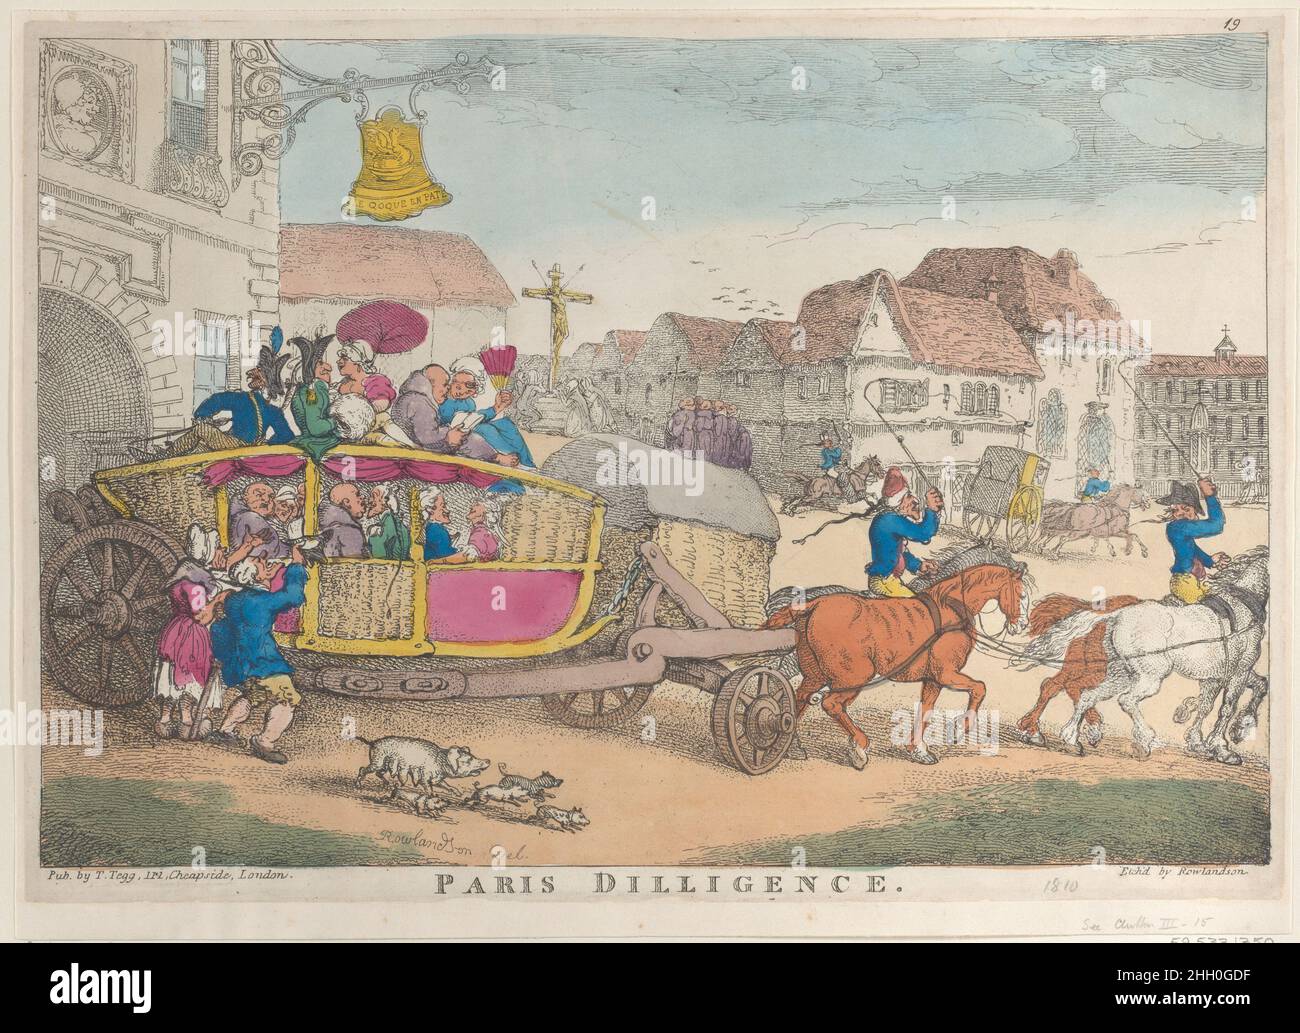 Paris Diligence 1810 Thomas Rowlandson A diligence coach full of people, led by four horses away from an inn. An old couple at left beg from the passengers, and sow with small pigs run alongside the coach. A crucifix is in the background center, where a group of nuns kneel in prayer.. Paris Diligence. Thomas Rowlandson (British, London 1757–1827 London). 1810. Hand-colored etching. Thomas Tegg (British, 1776–1846). Prints Stock Photo